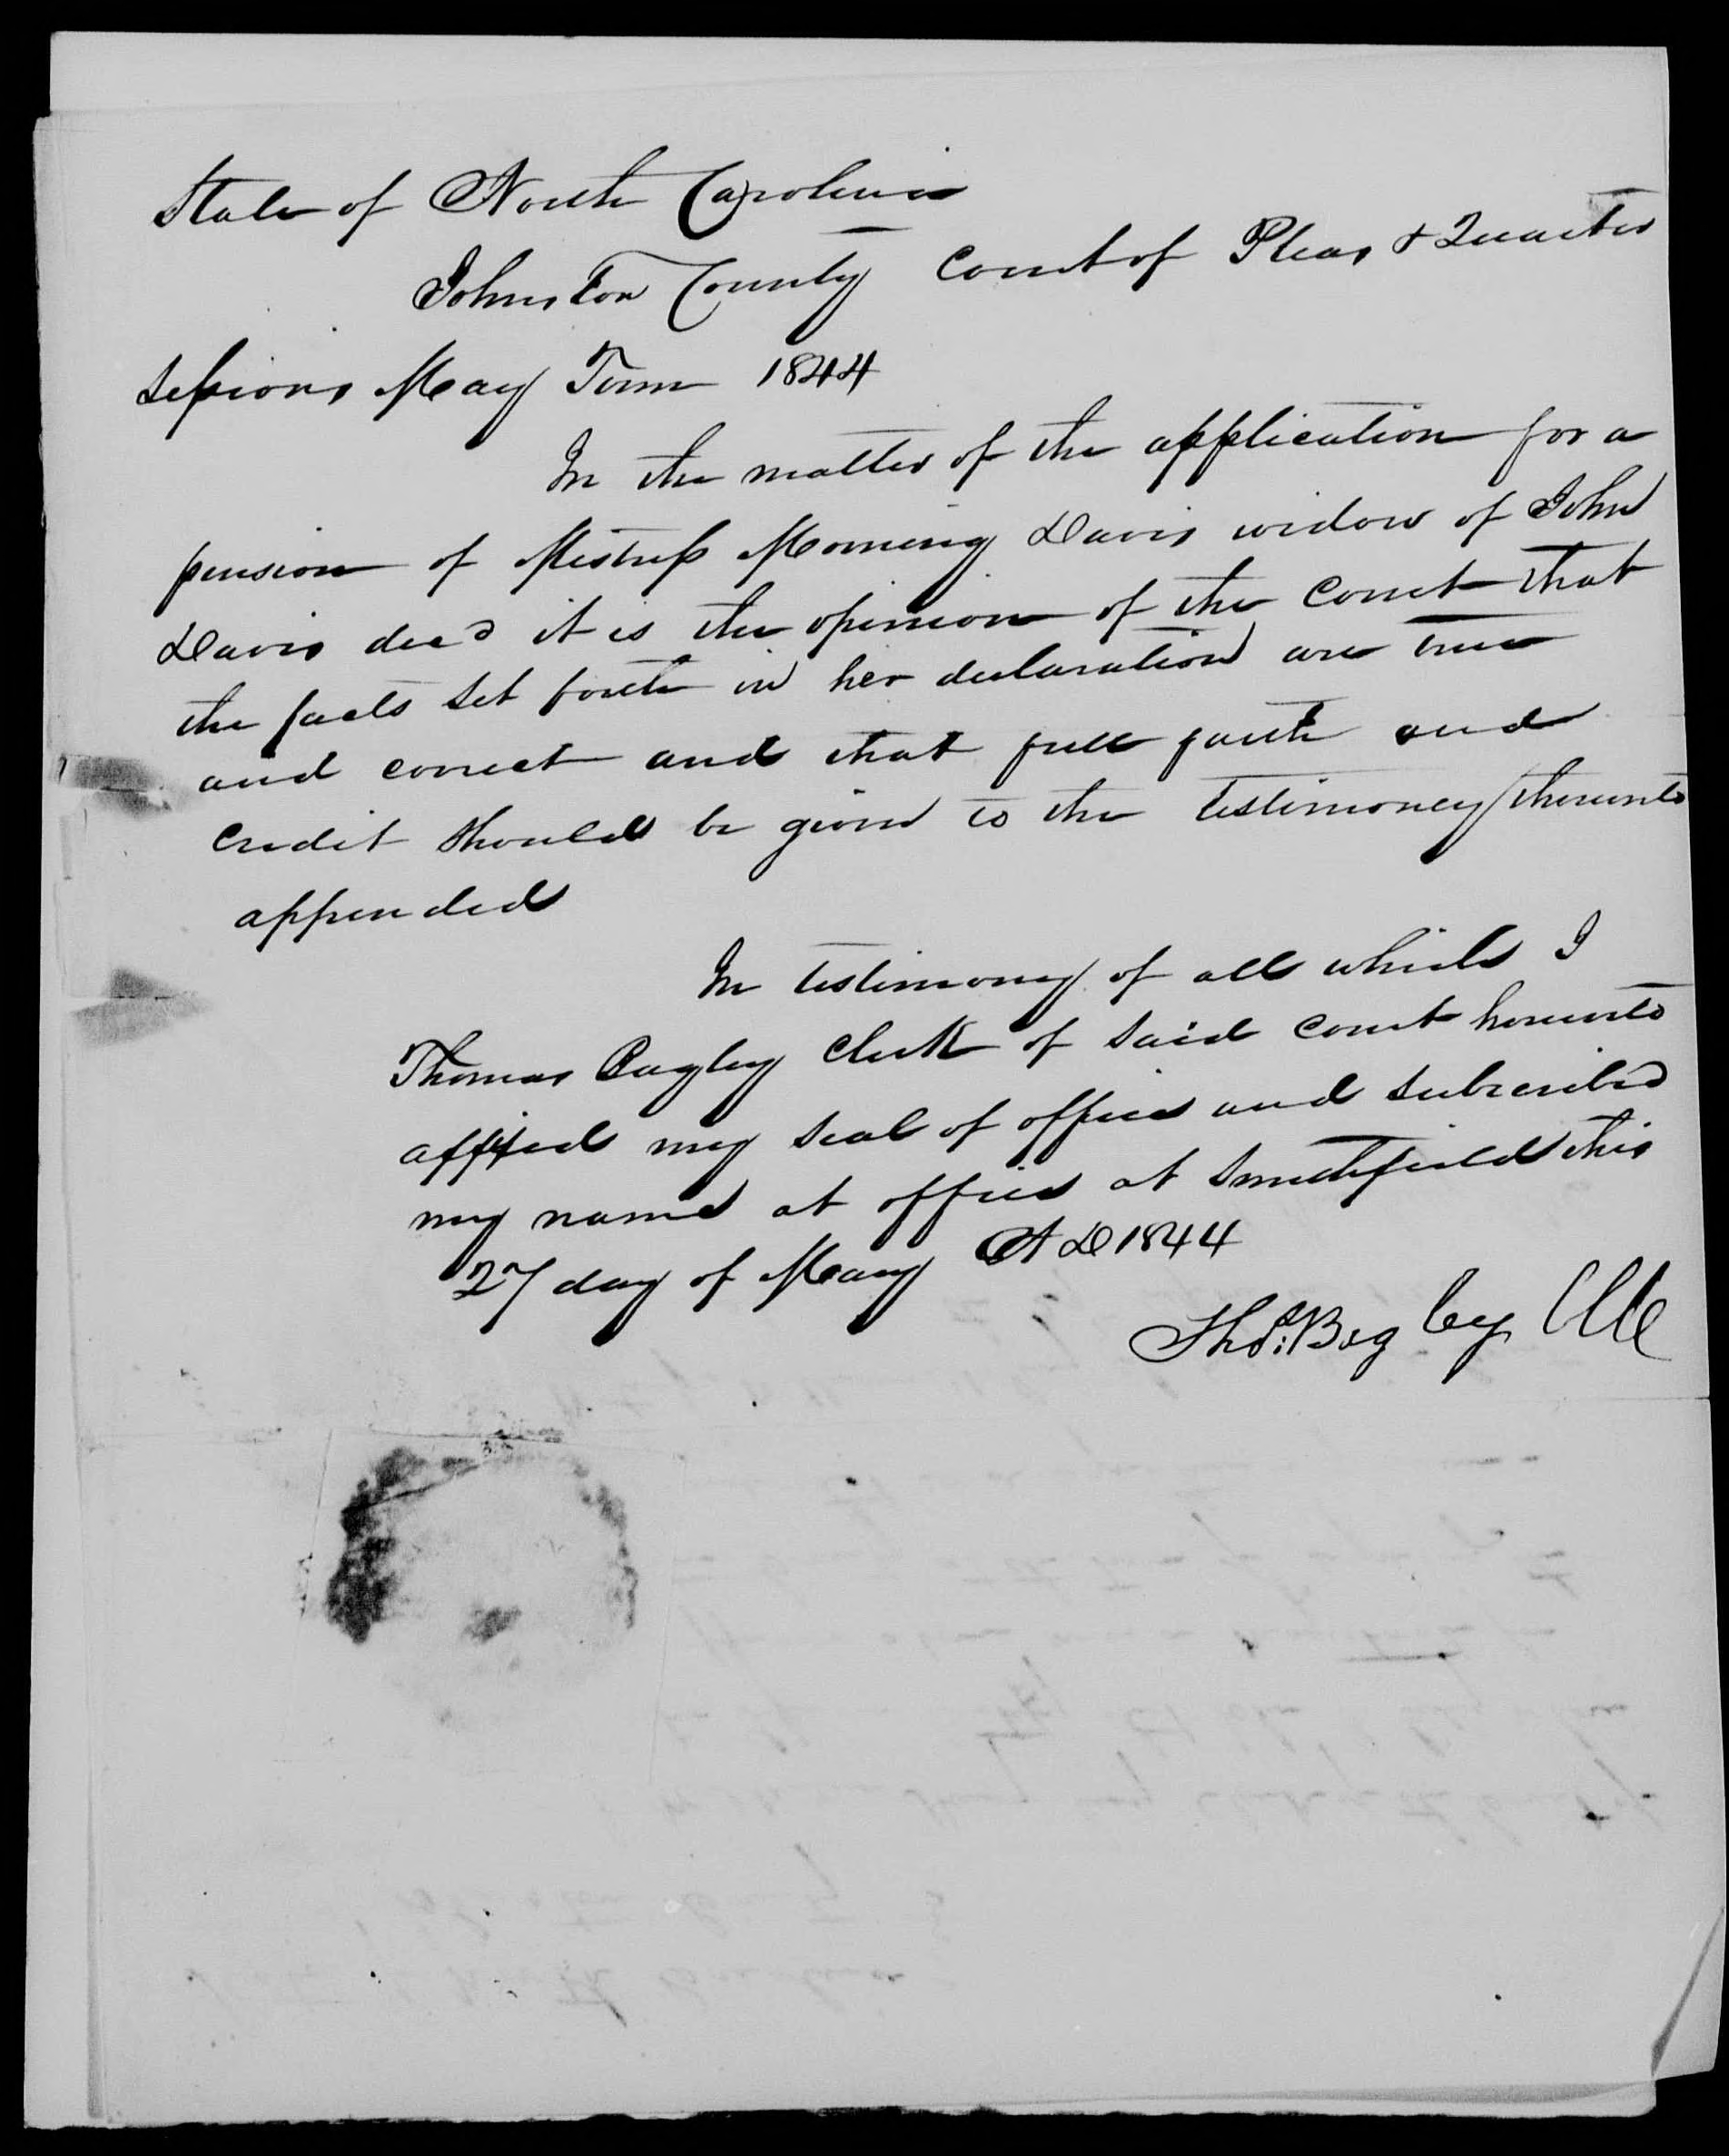 Certificate of the Johnston Court Court for Mourning Davis' Pension Claim, 27 May 1844